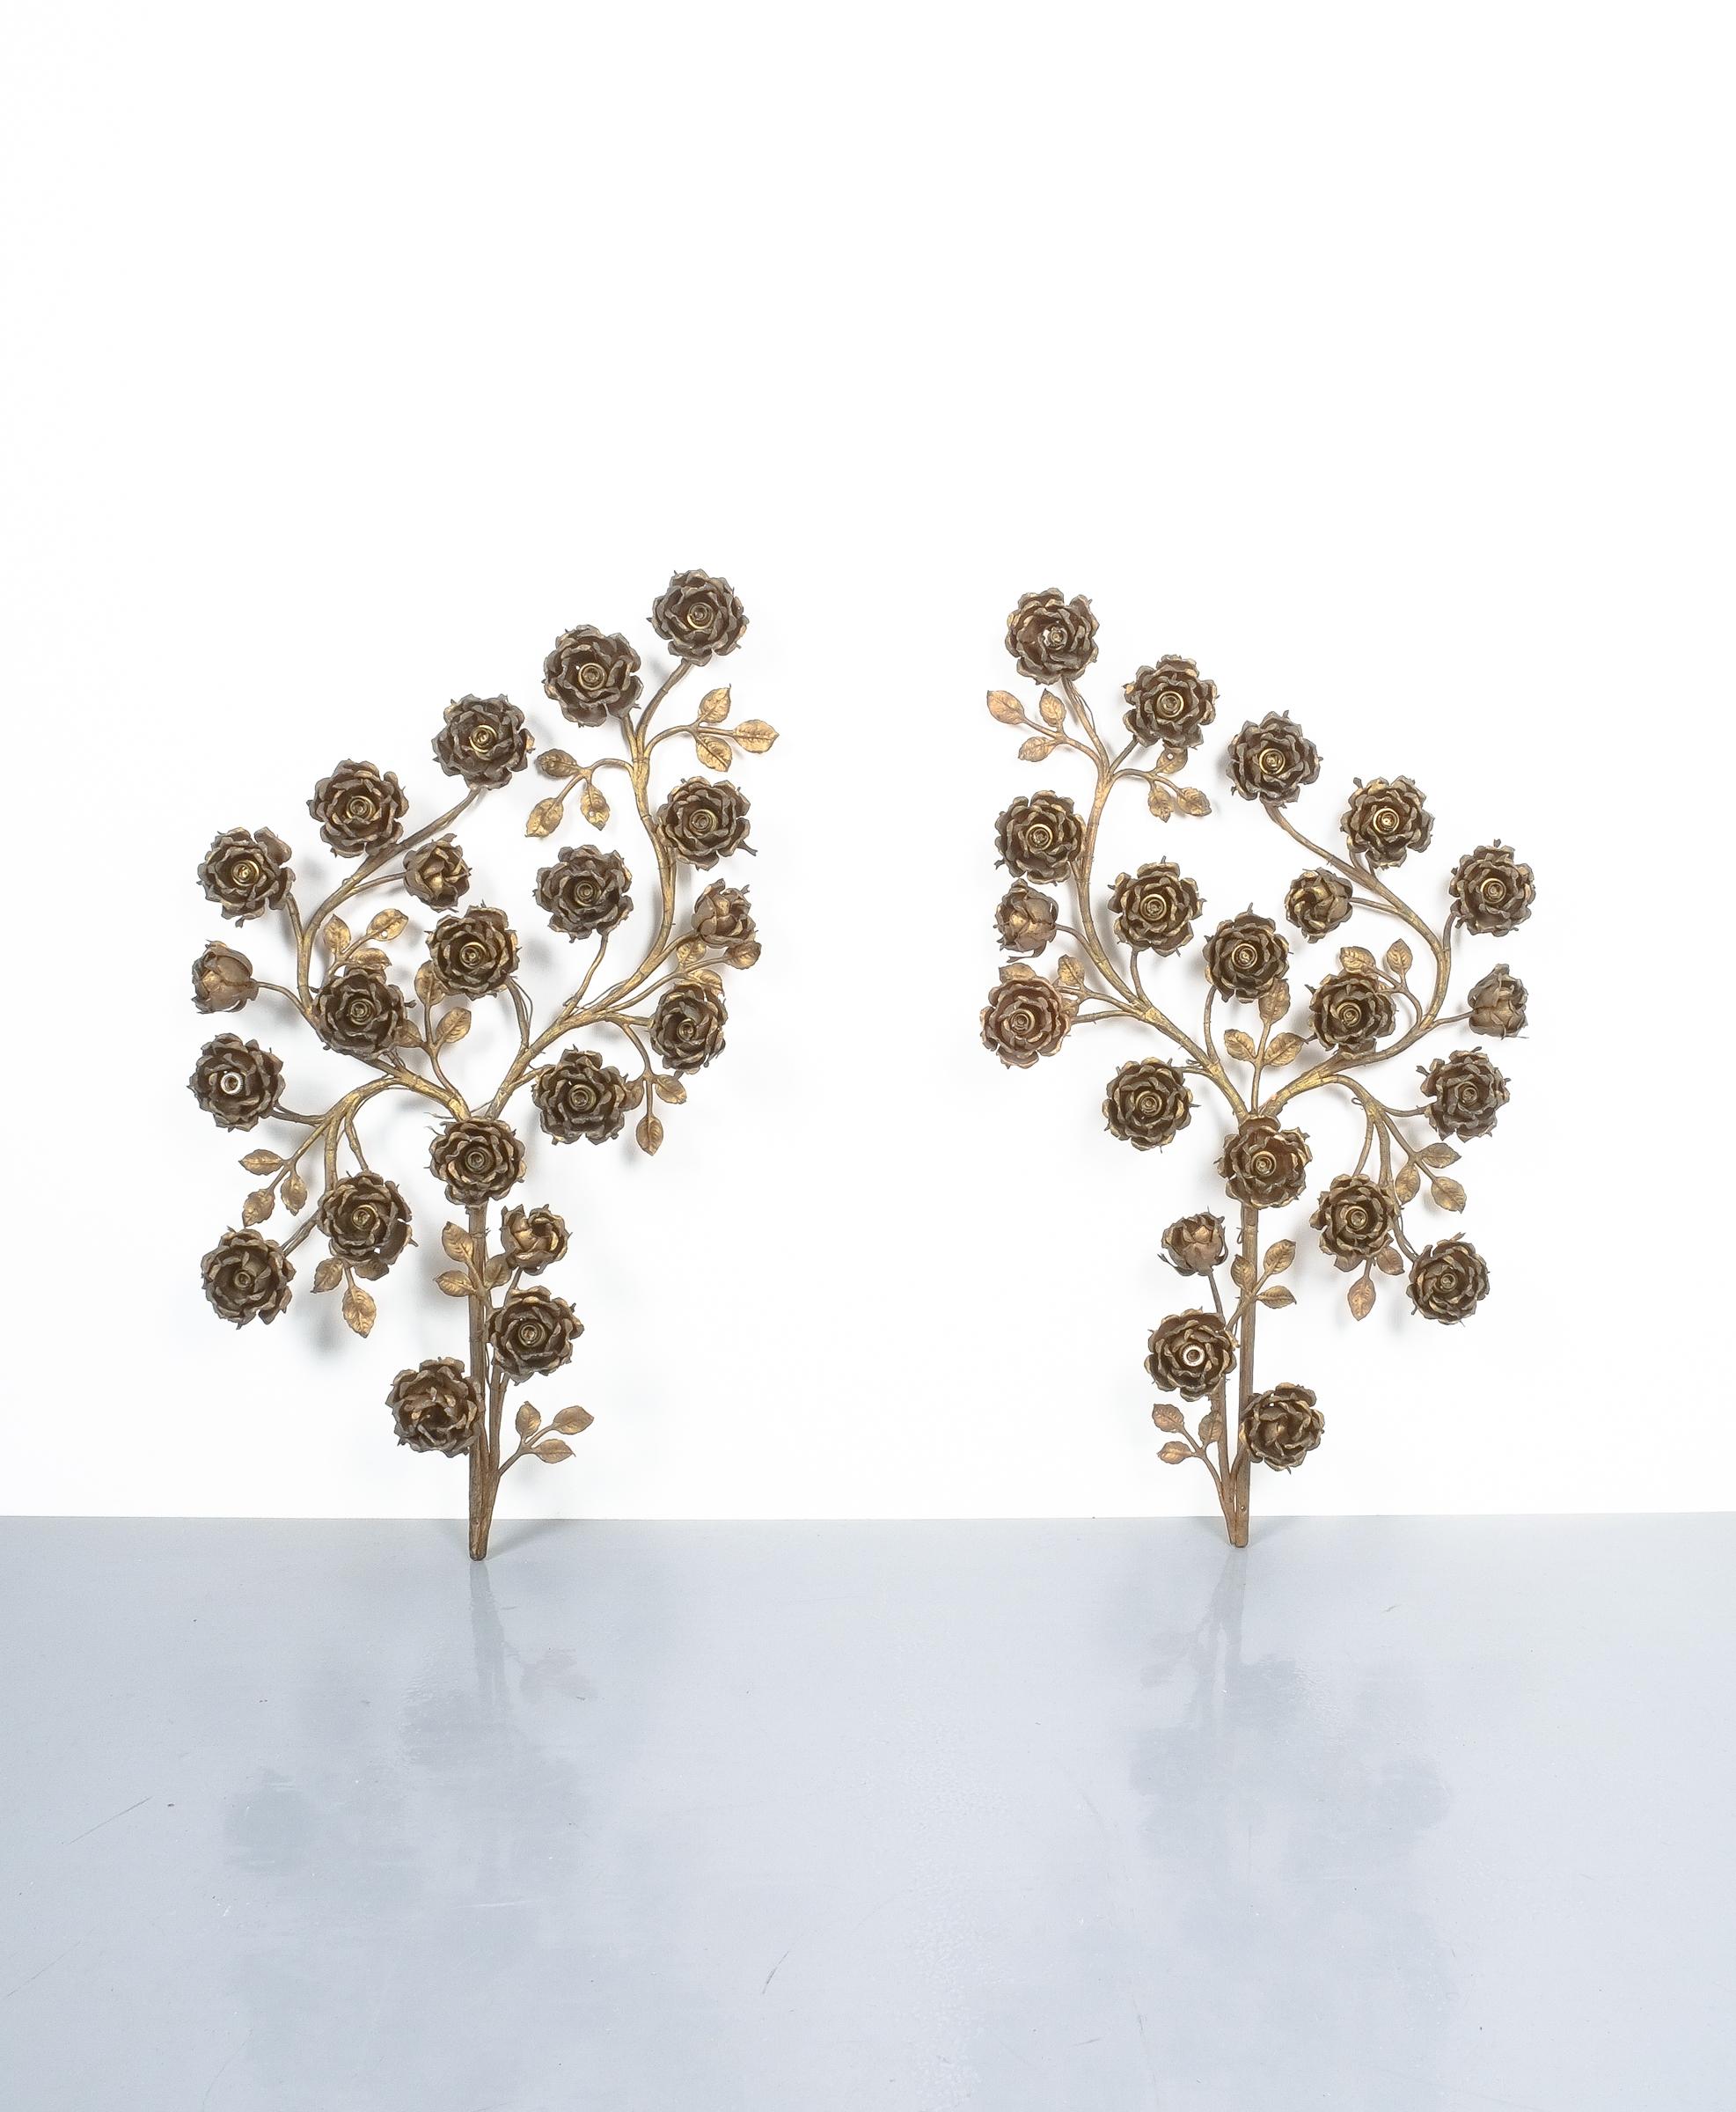 Pair of unique Rosebush Forged iron wall lights, France, circa 1950
Measures: 39.73